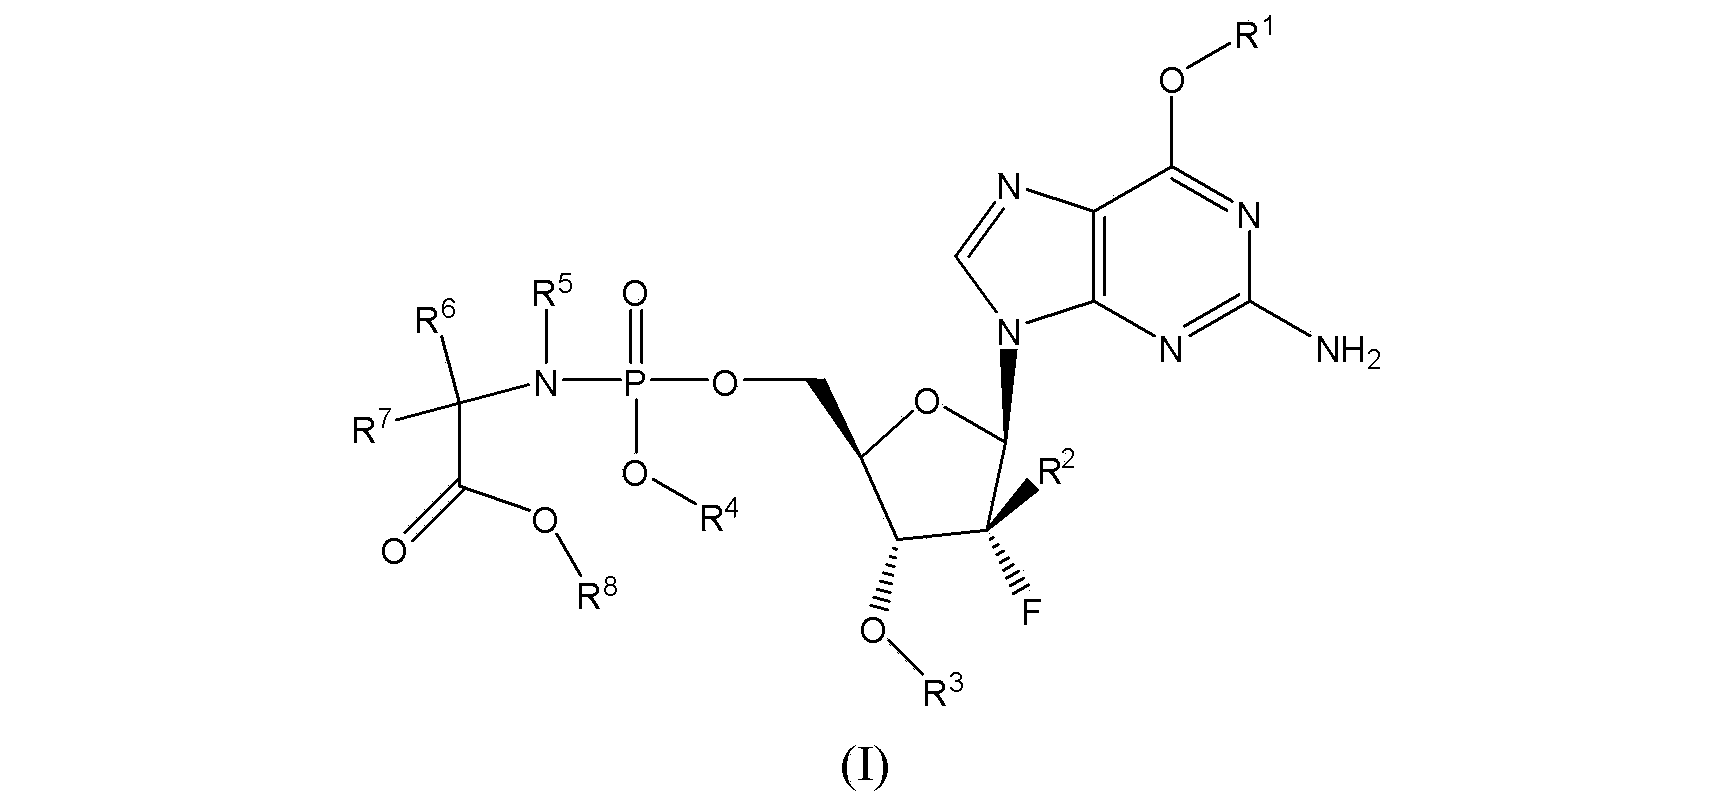 Heteroaryl phosphamide compounds with antiviral activity